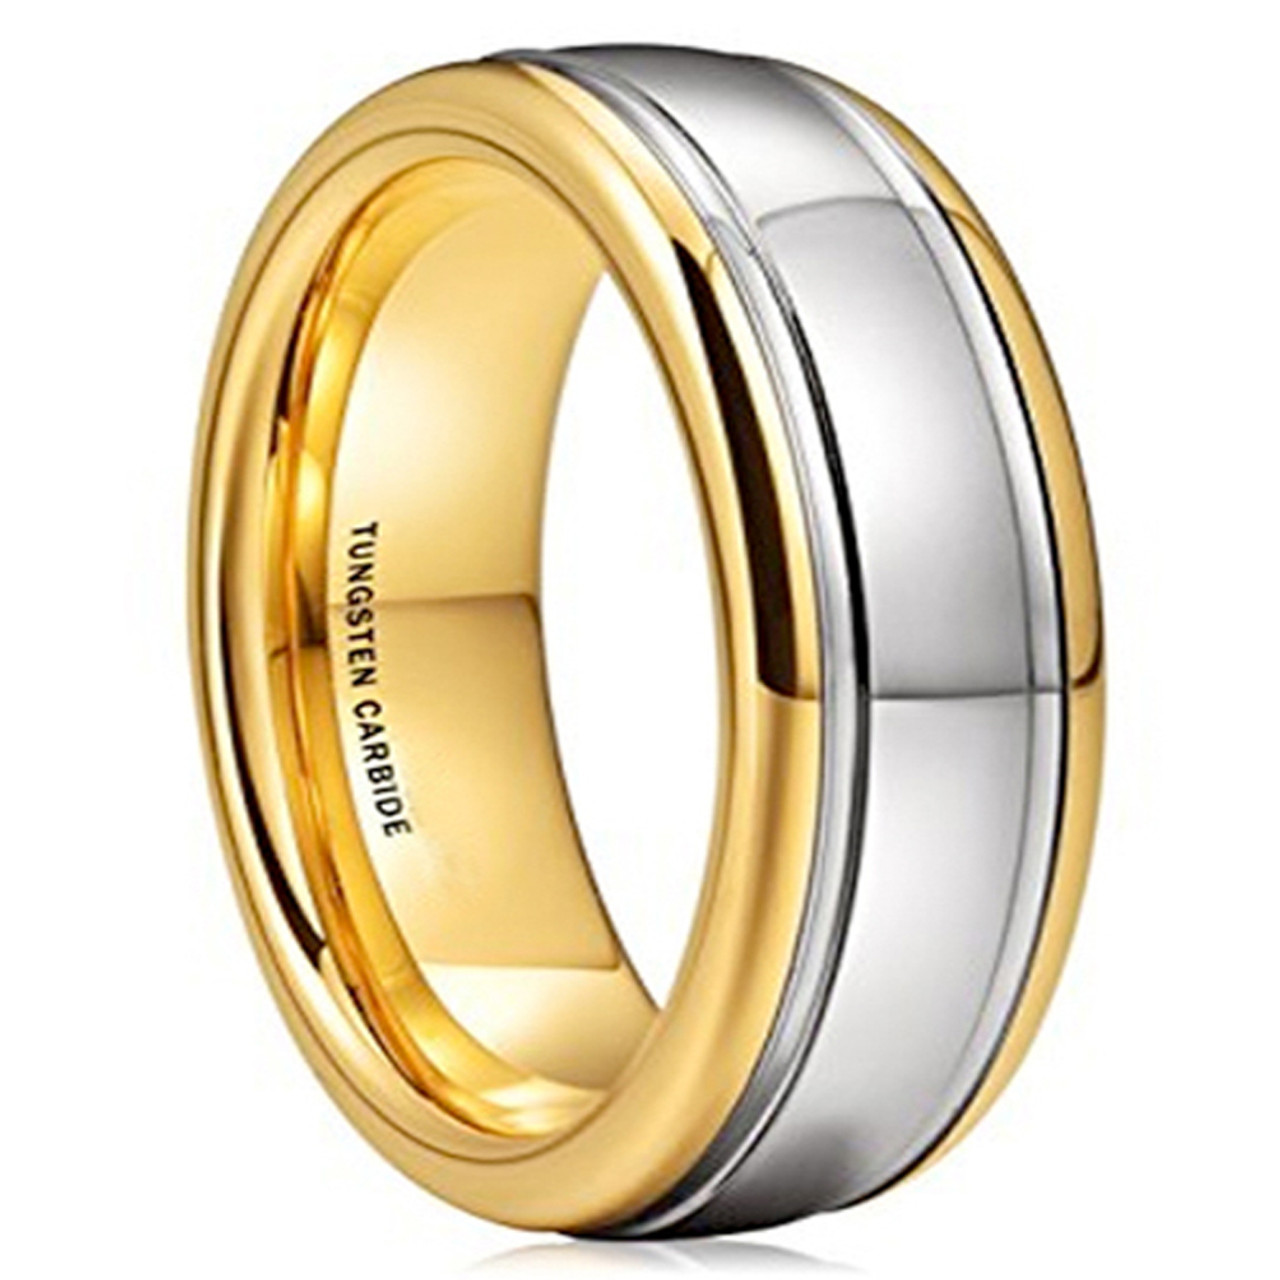 Unisex or Men's Tungsten Wedding Band (8mm). Gold and Silver Dome Gunmetal Bridal Ring. Tungsten Carbide Wedding Ring. Mens Jewelry